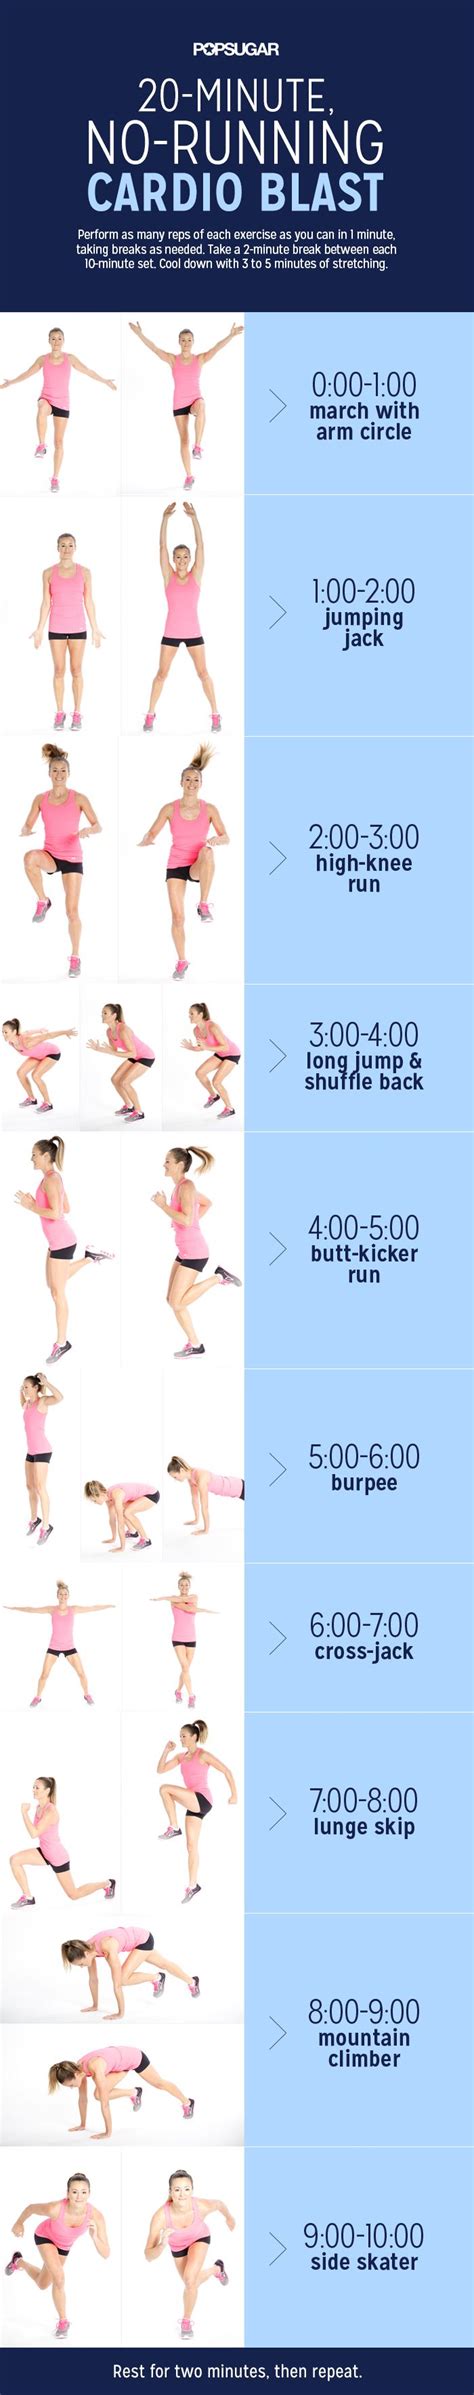 25 Hiit Cardio Workouts That Will Get You In The Best Shape Of Your